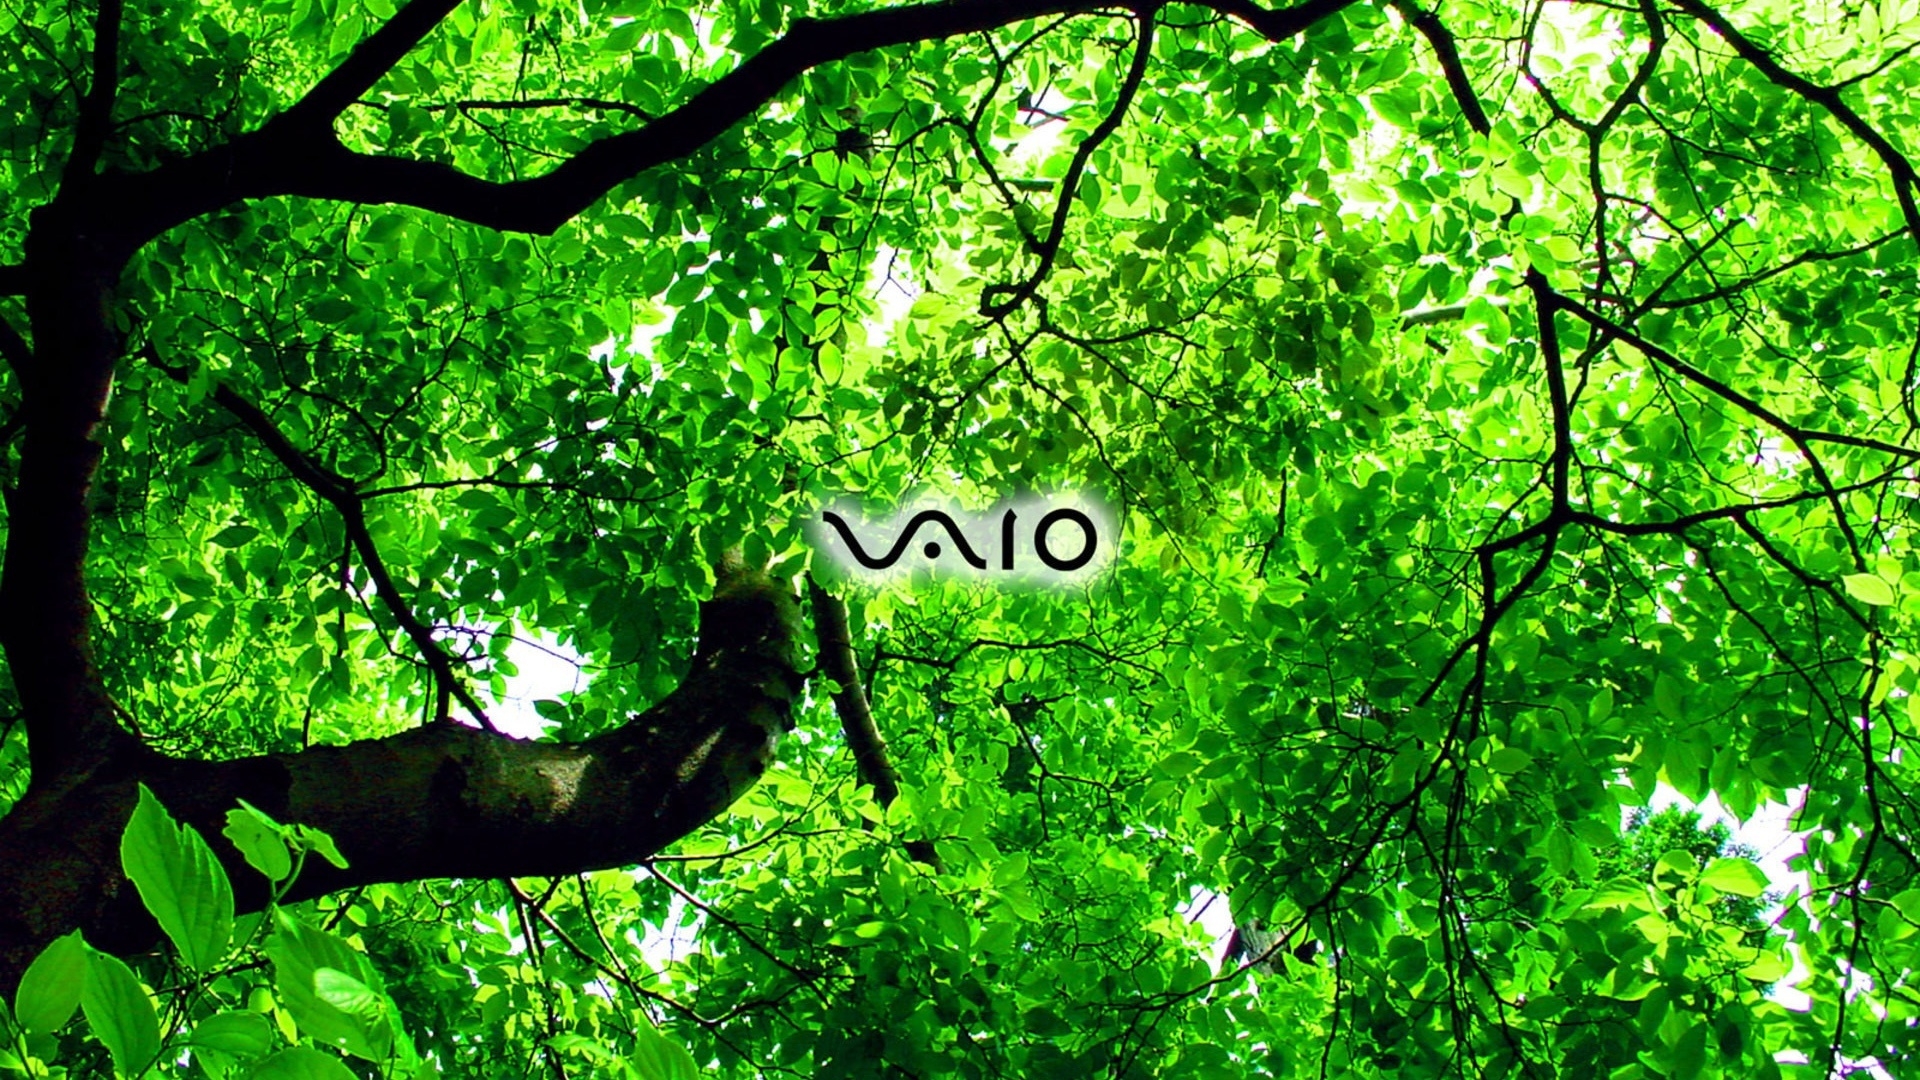 Sony Vaio green for 1920 x 1080 HDTV 1080p resolution